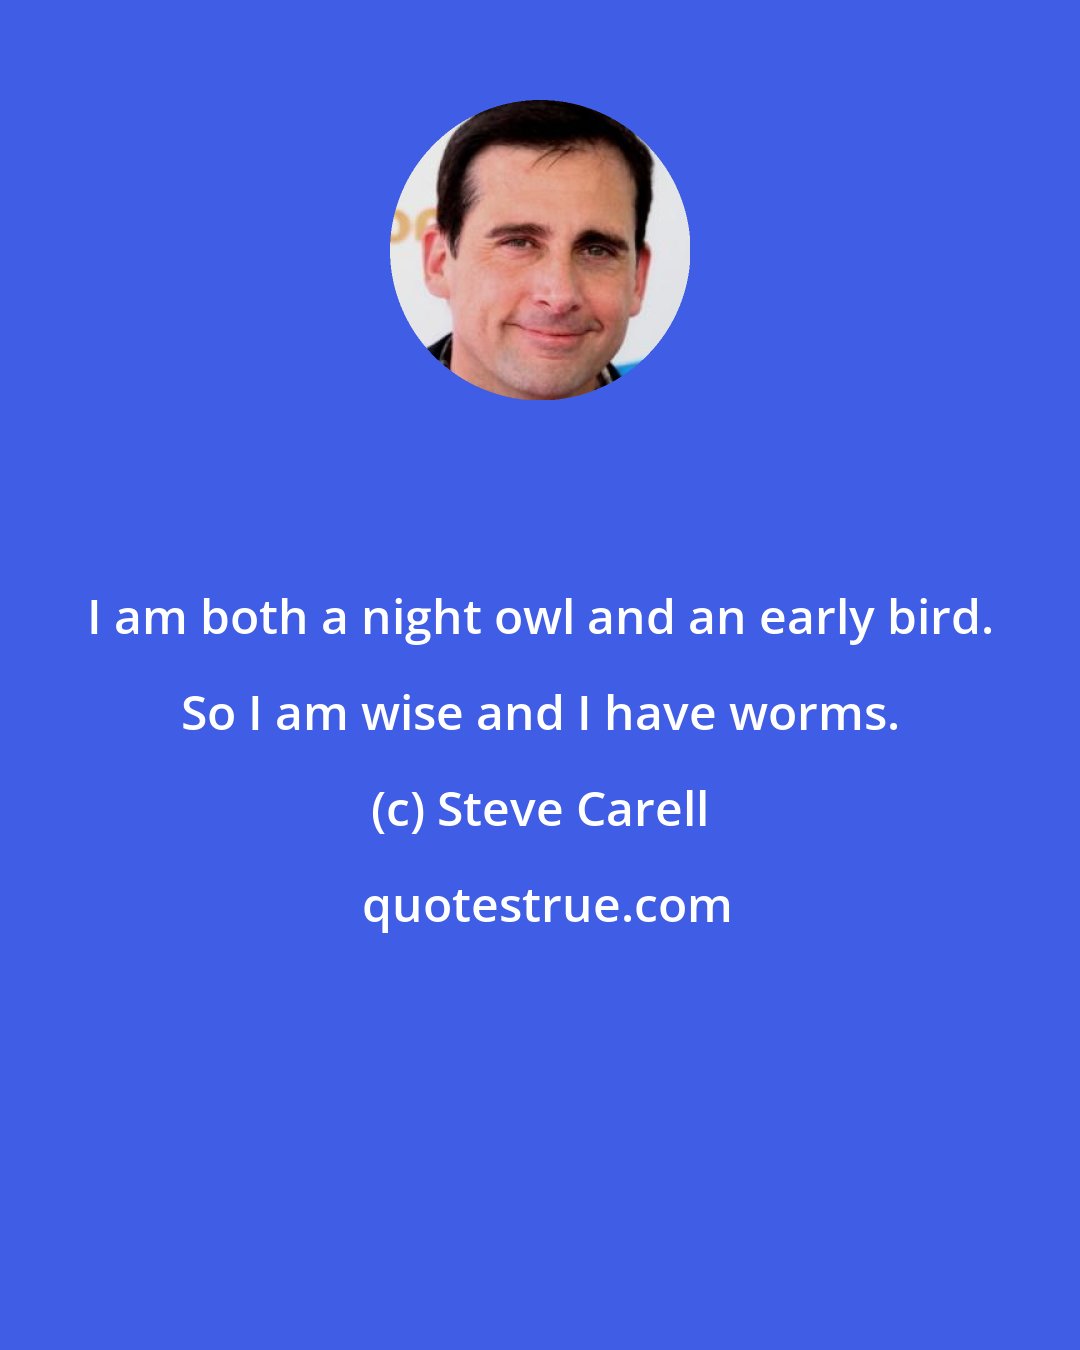 Steve Carell: I am both a night owl and an early bird. So I am wise and I have worms.